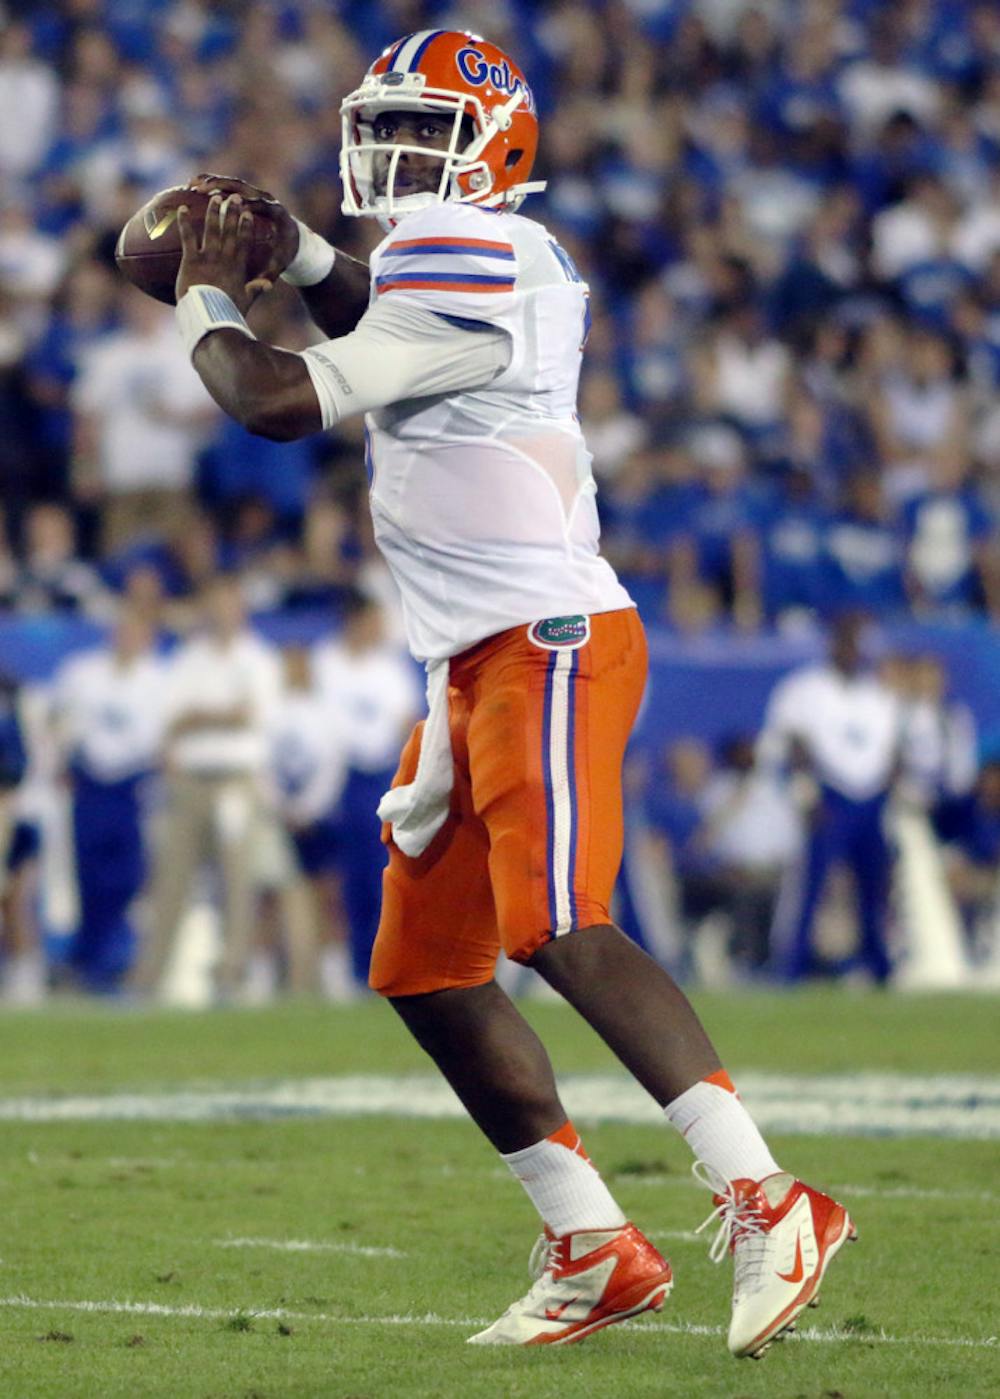 <p>Tyler Murphy attempts a pass during Florida’s 24-7 victory against Kentucky on Saturday at Commonwealth Stadium in Lexington, Ky.</p>